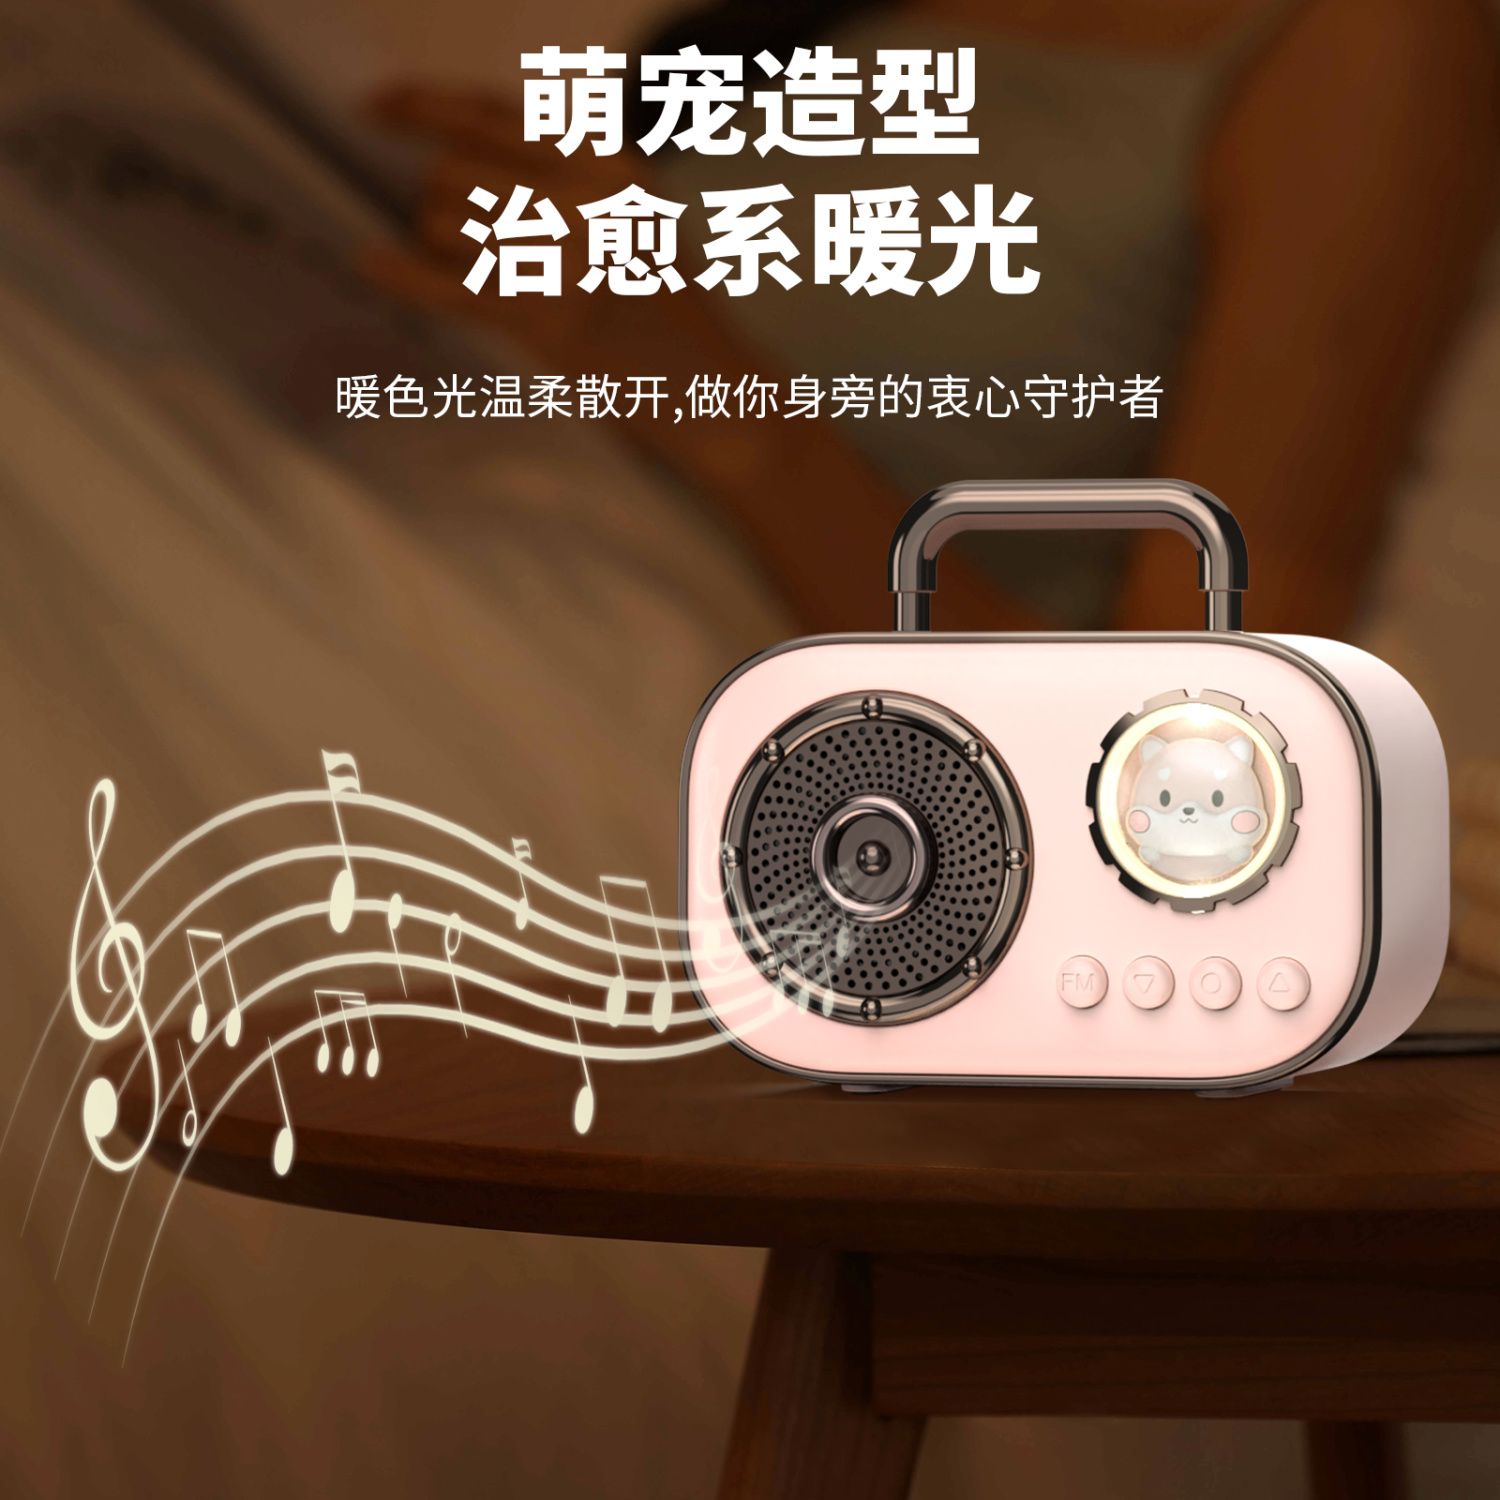 High-looking Q version audio rechargeable wireless Bluetooth portable cartoon space capsule audio long-lasting outdoor high-quality